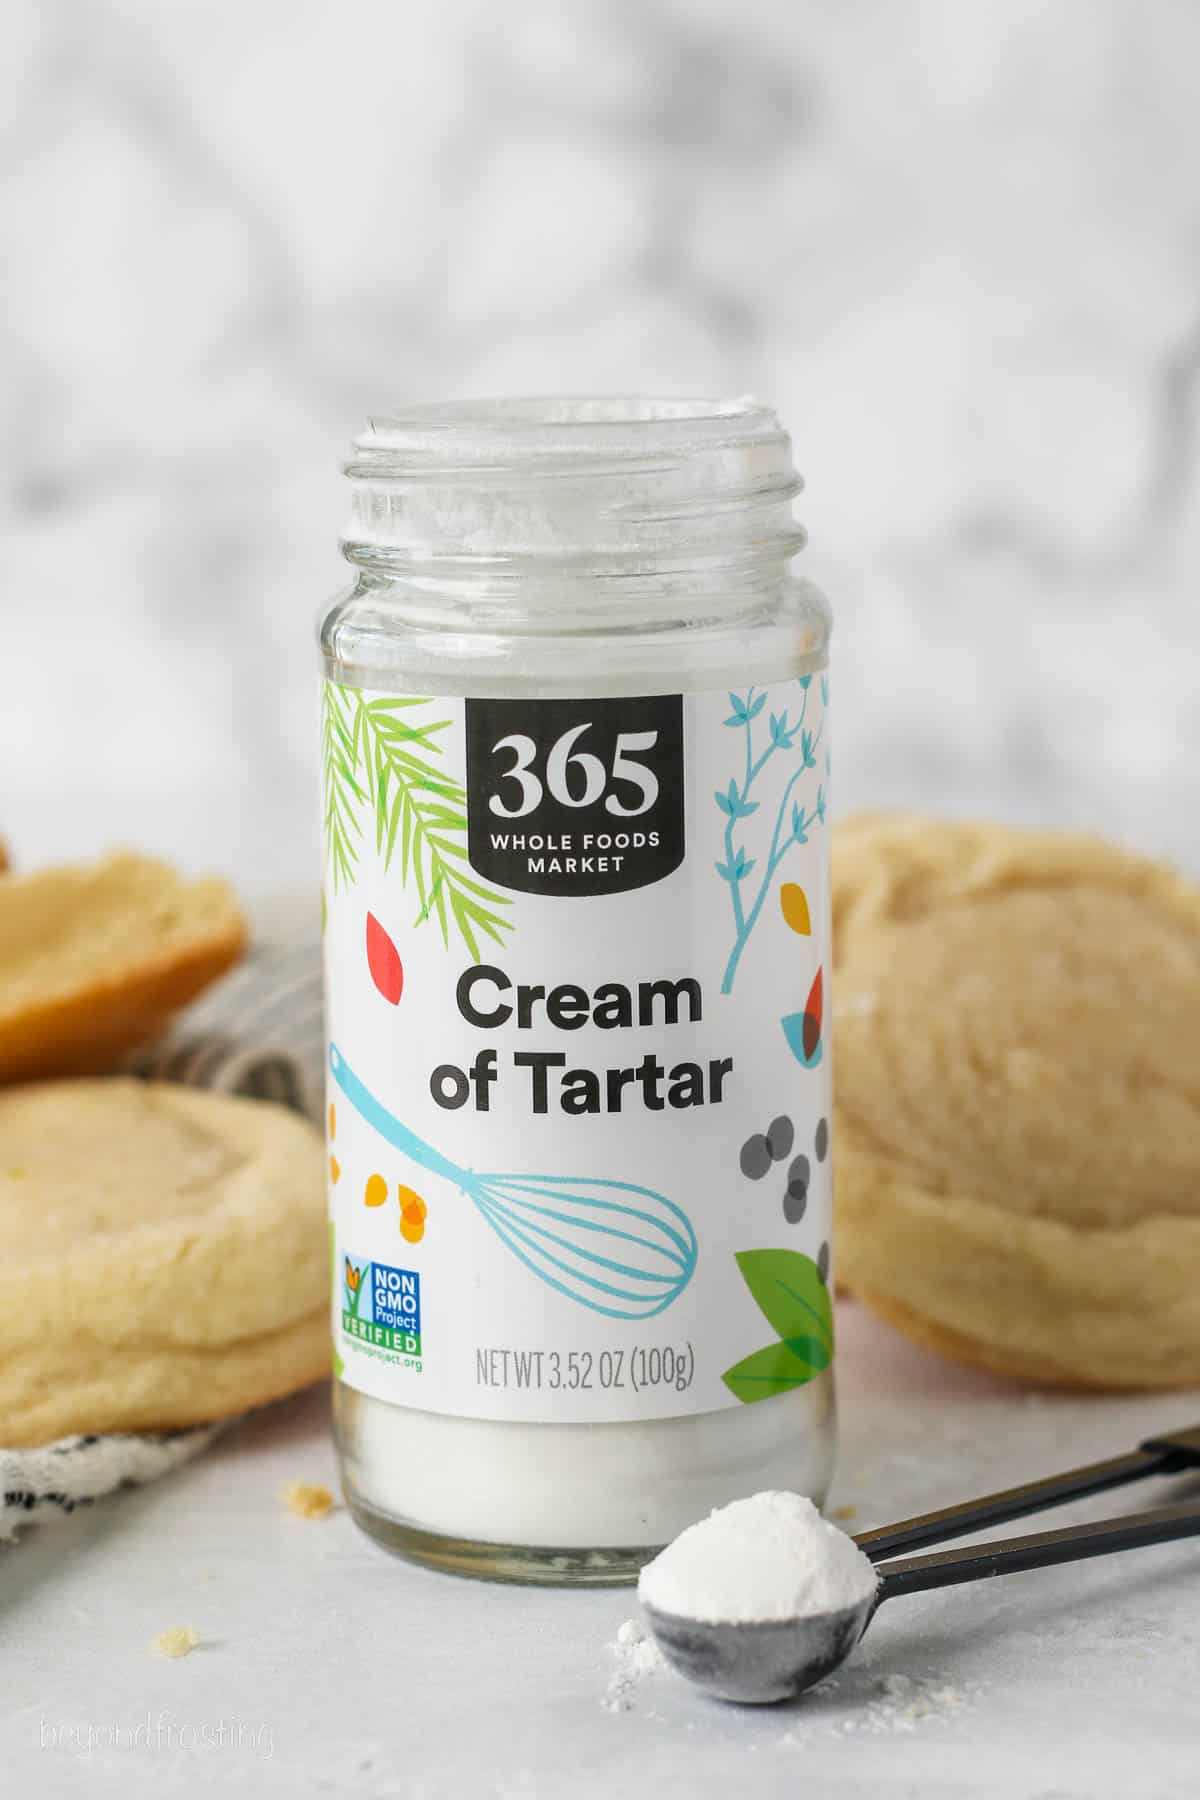 A jar of cream of tartar on a countertop next to a teaspoonful, with sugar cookies in the background.